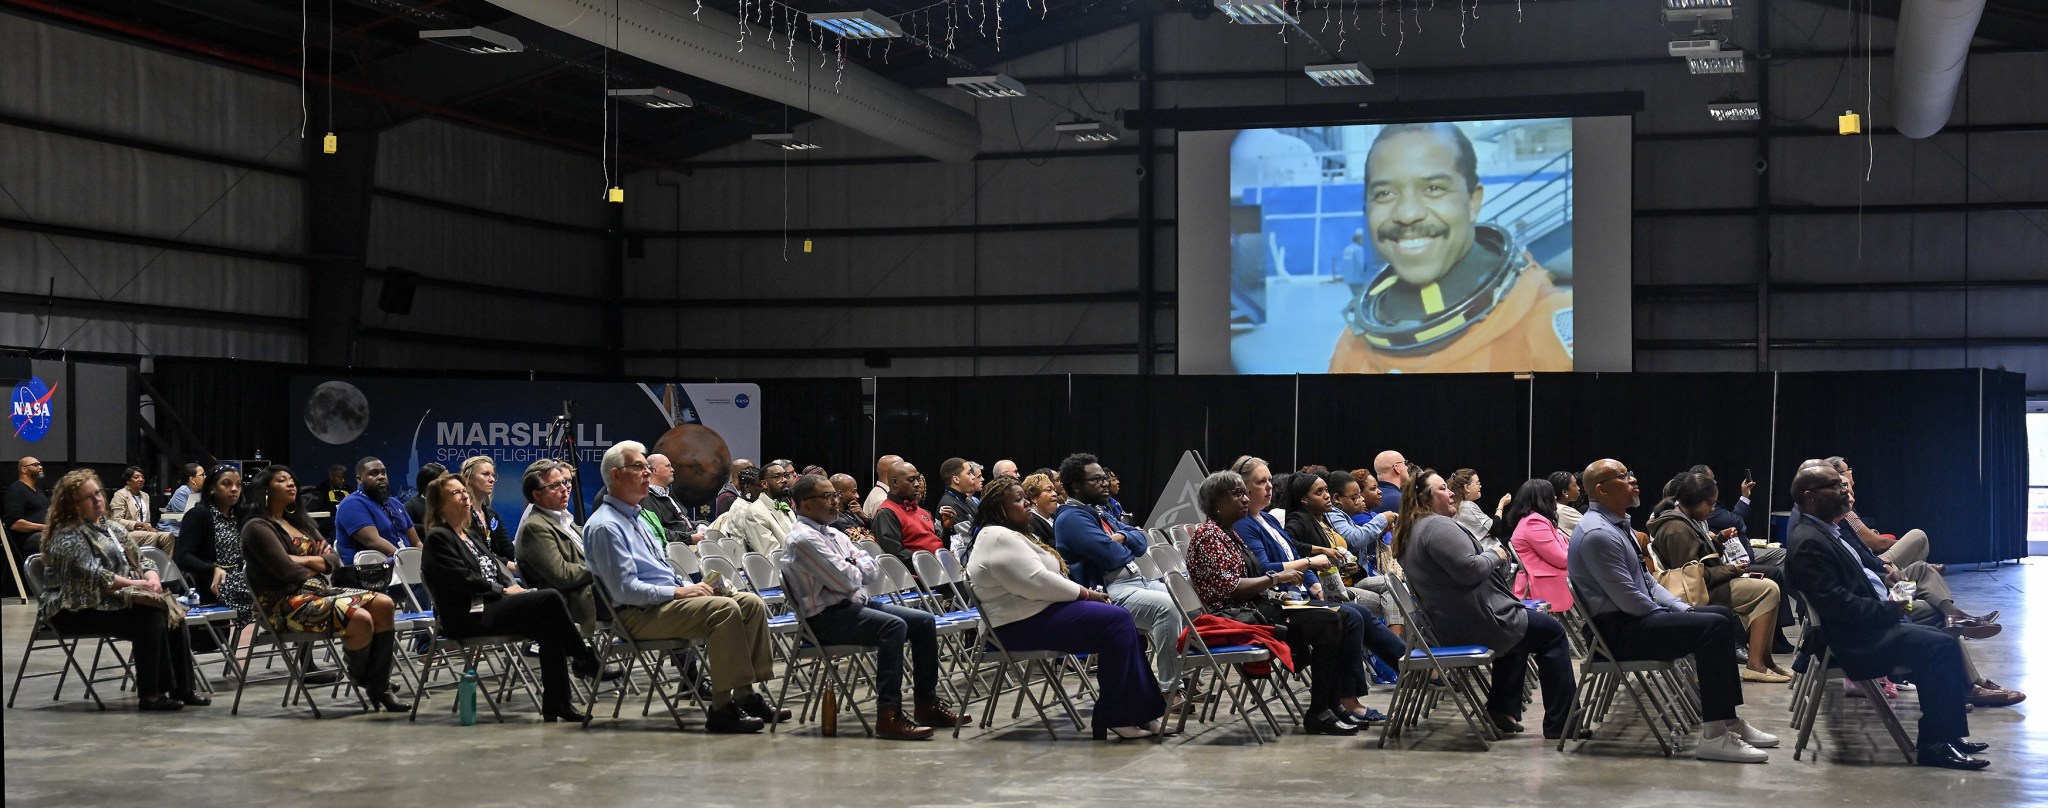 Attendees at BEAM's Black History Month observance event Feb. 27 watch the NASA documentary 